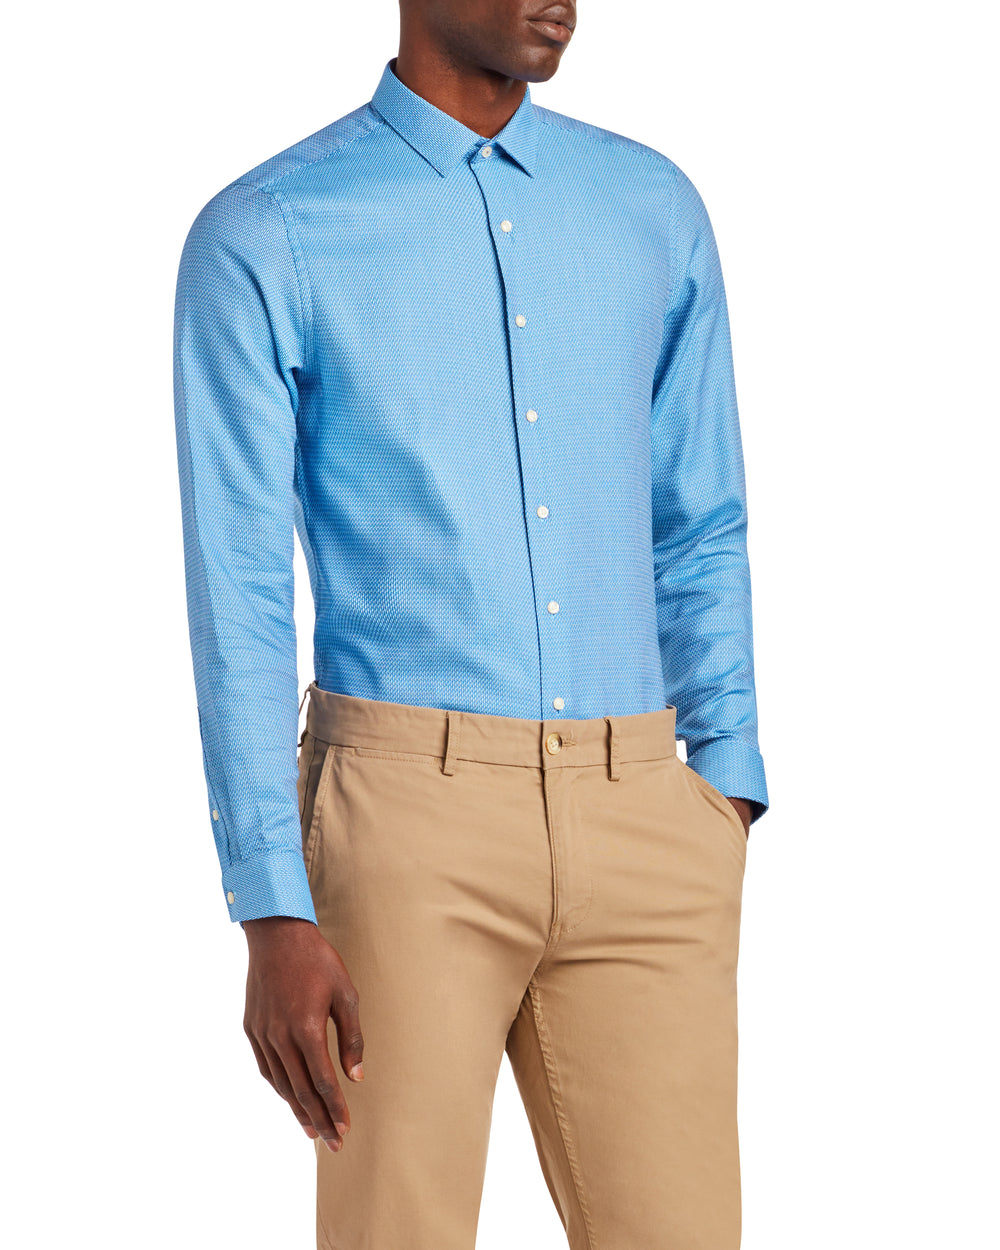 Textured Unsolid Solid Skinny Fit Dress Shirt - Blue